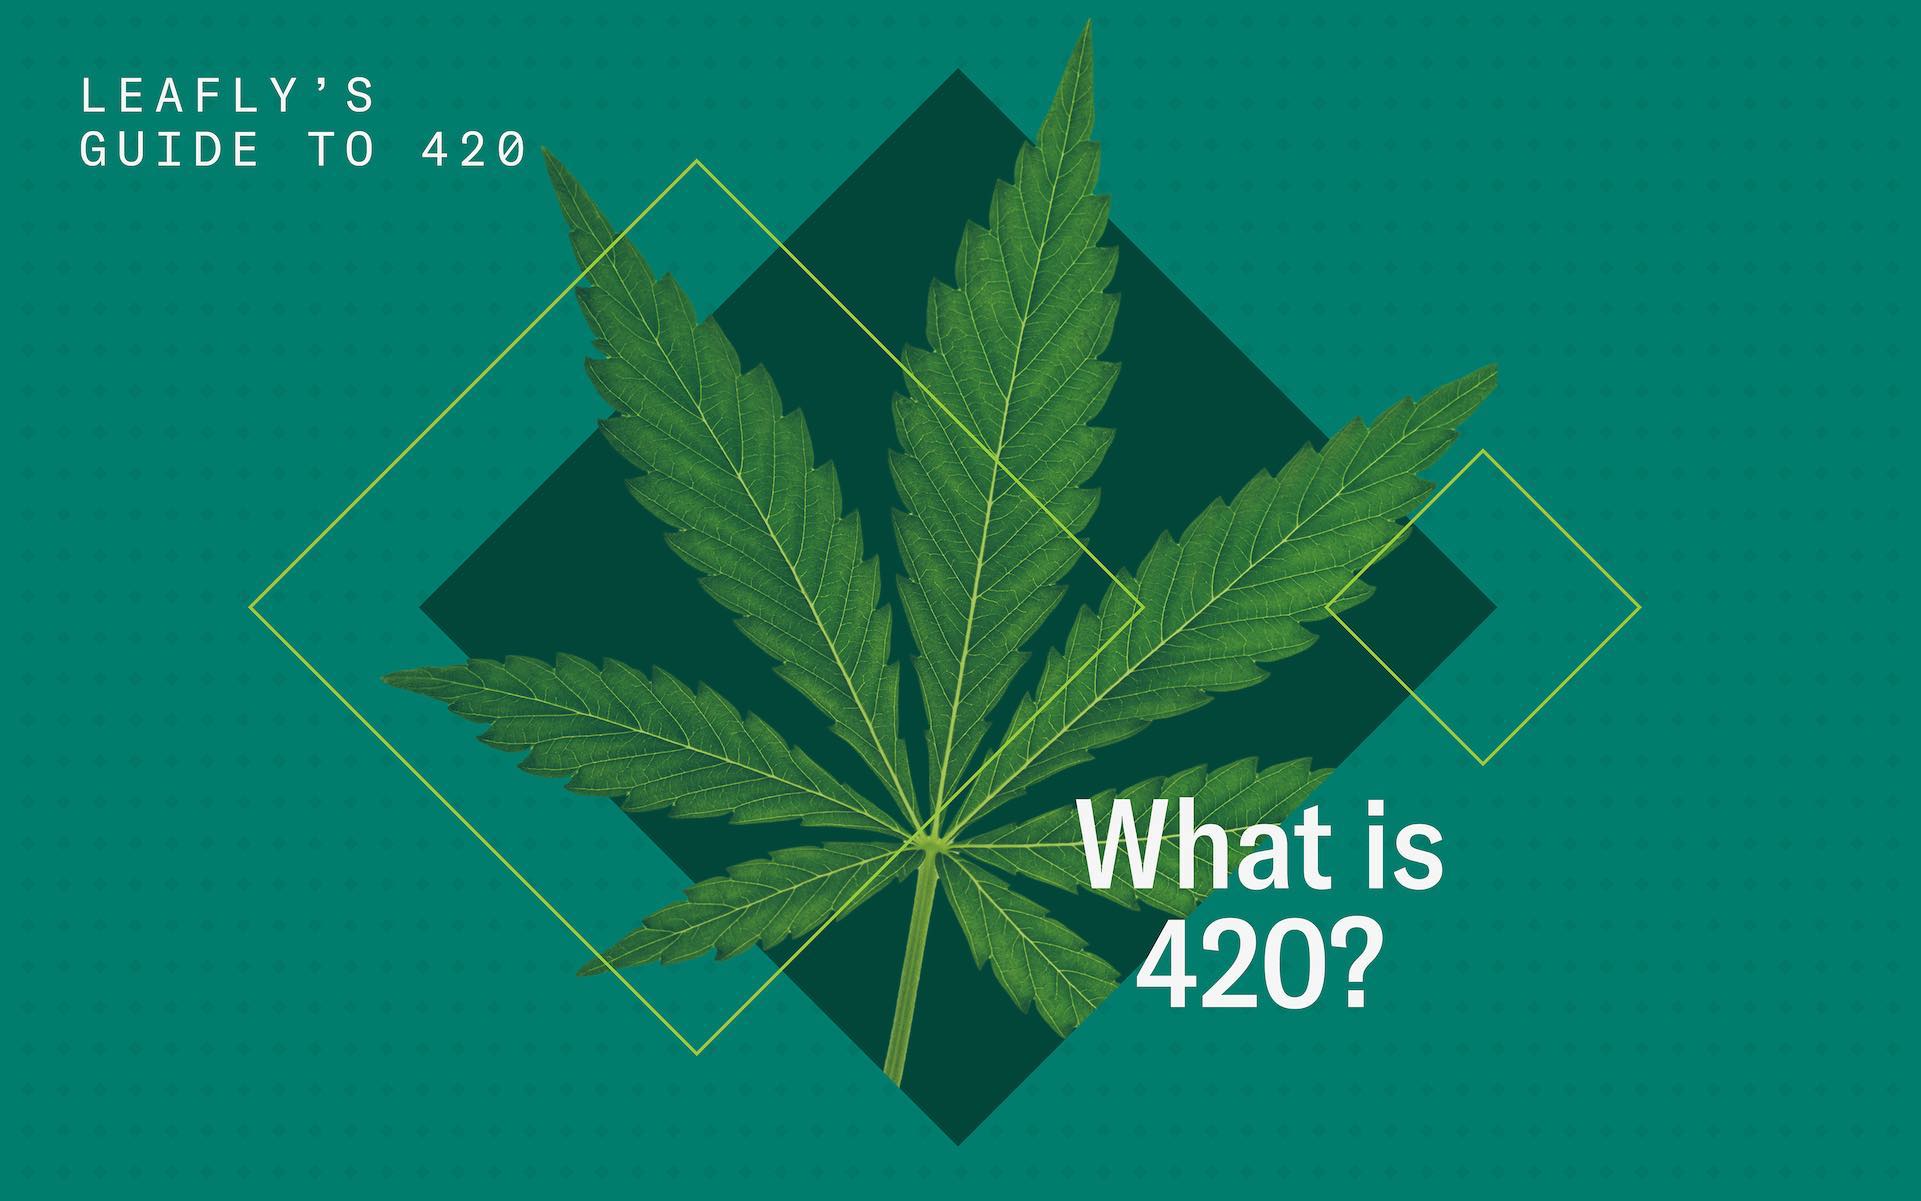 Leafly's Guide to 420 Leafly